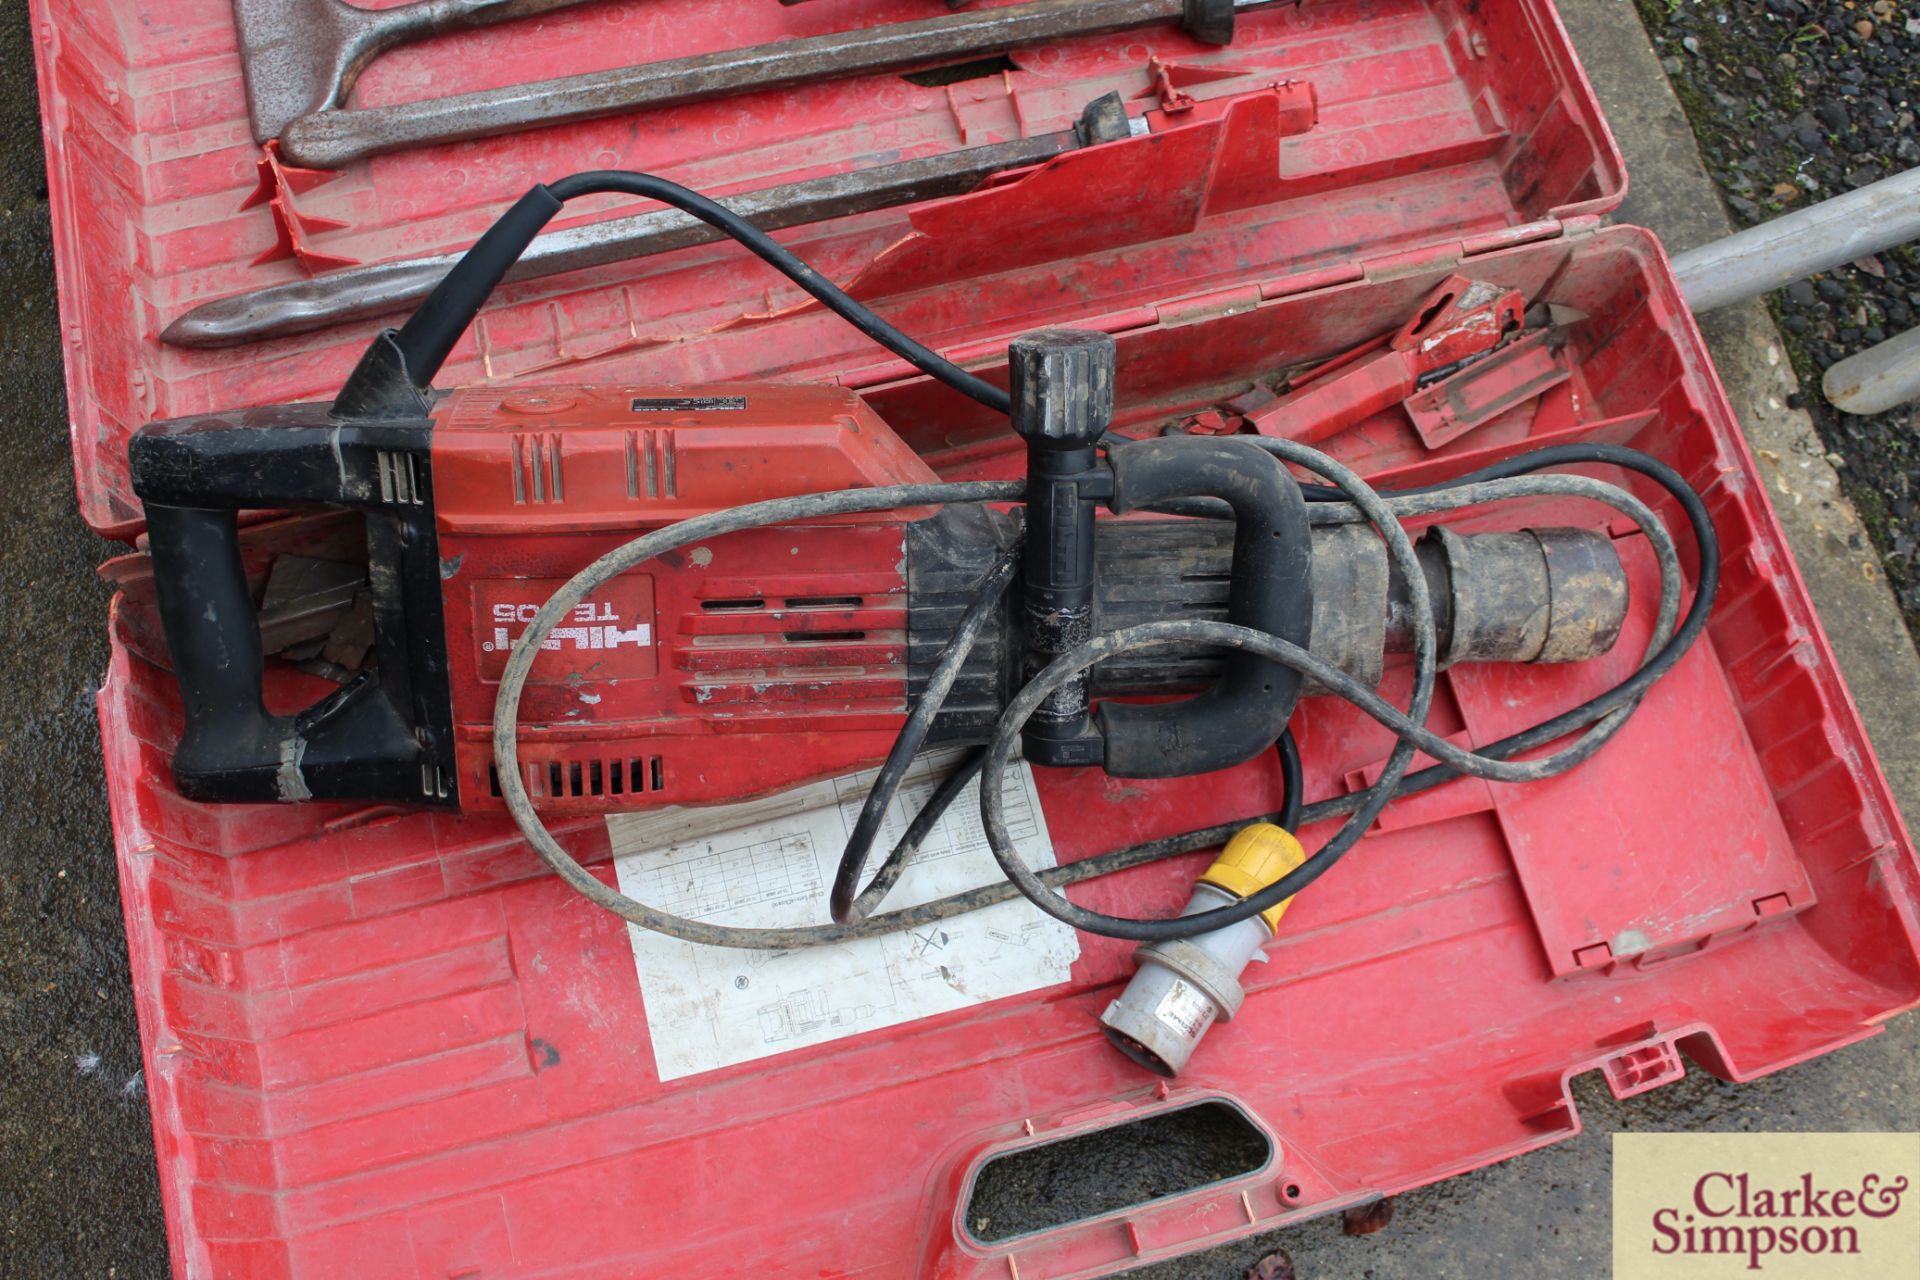 Hilti TE 905-AVR 110V breaker in case with various chisels. Vendor reports this was reconditioned - Image 4 of 6